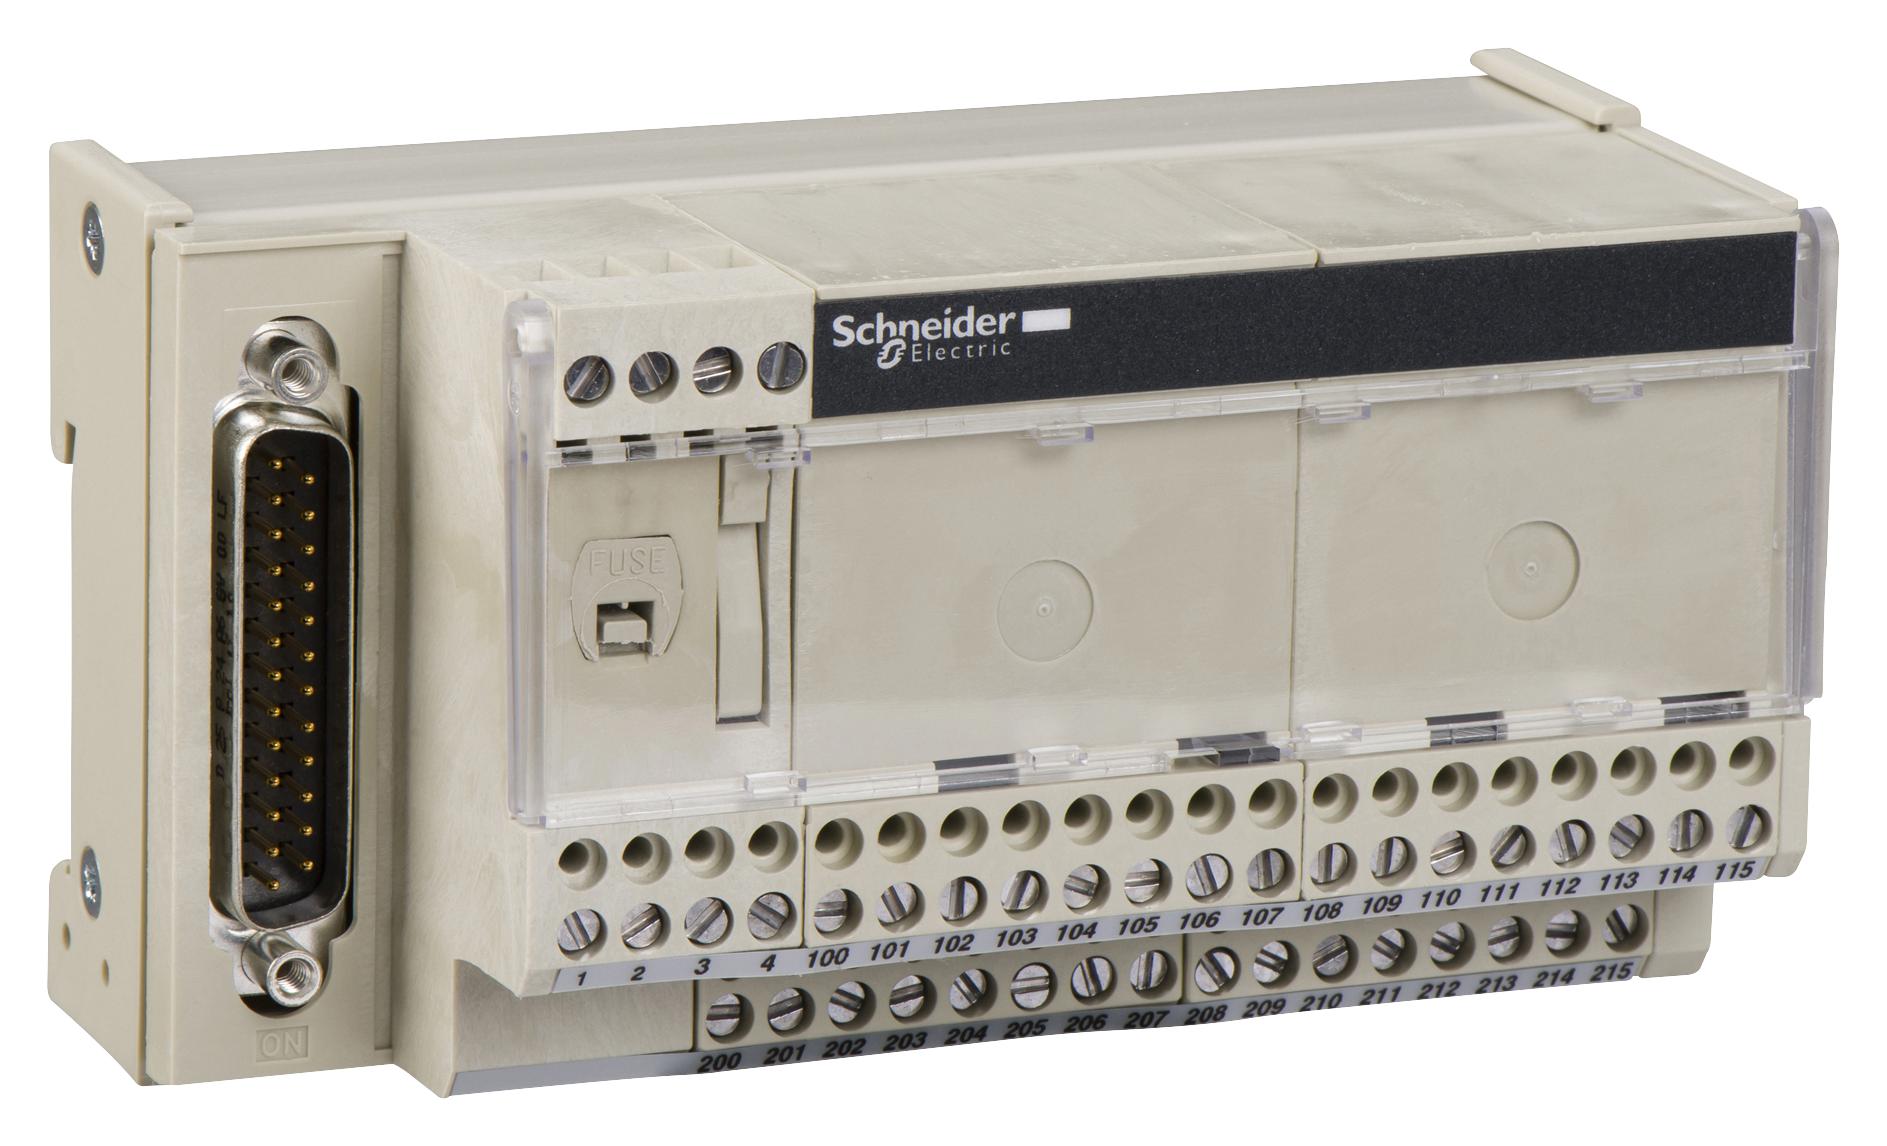 ABE7CPA31 CONNECTION SUB-BASE, 8-CH, ANALOG INPUT SCHNEIDER ELECTRIC